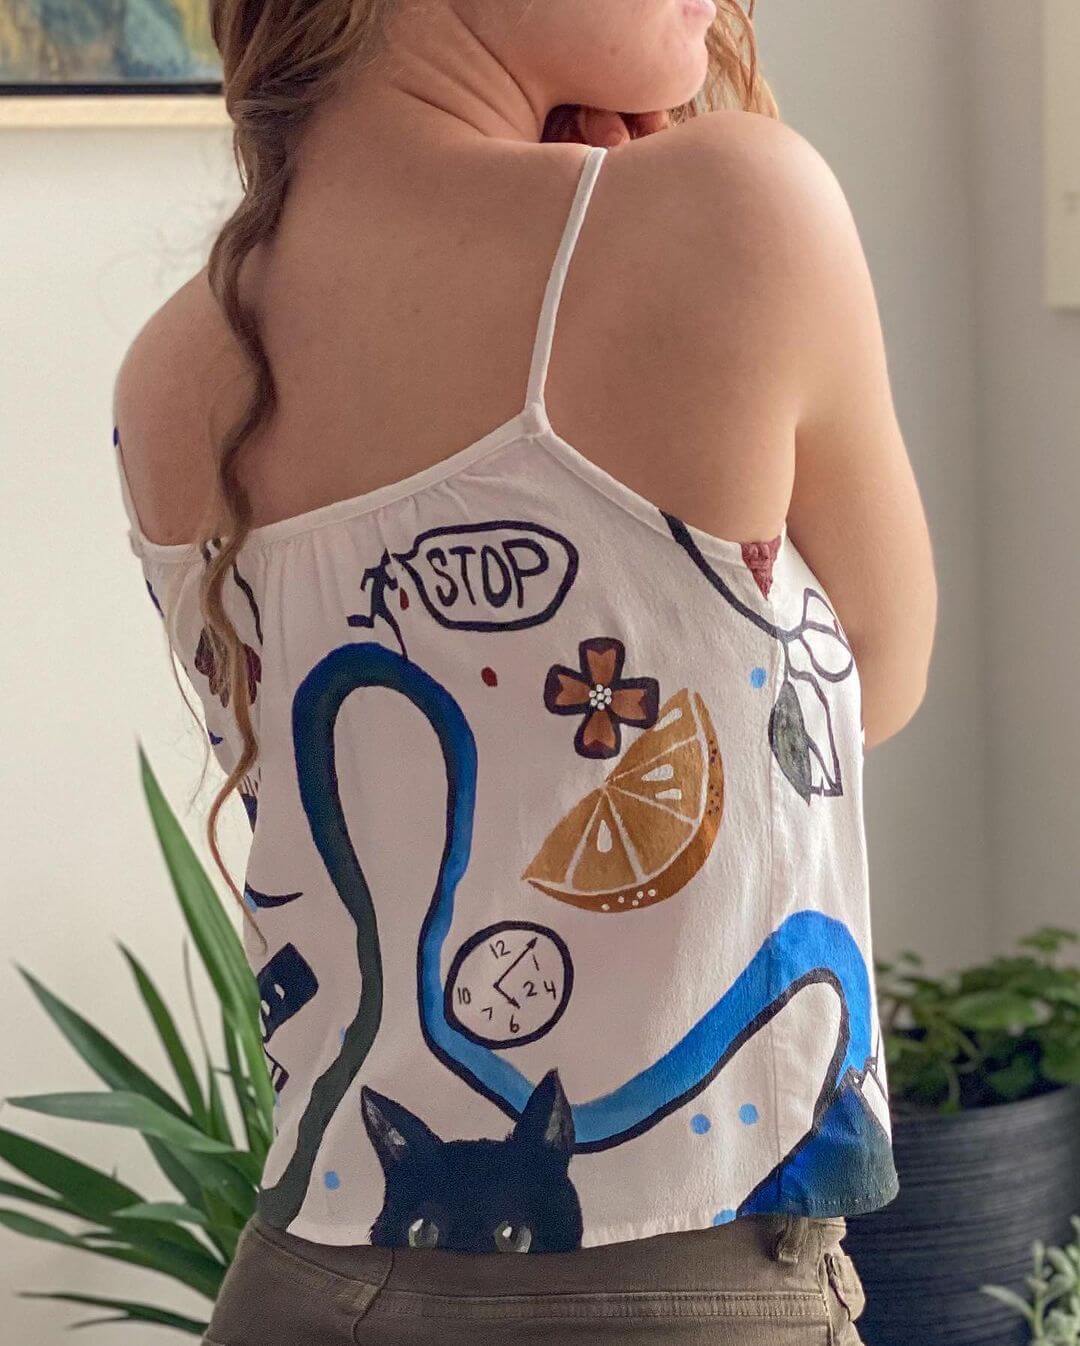 Back of a white singlet with abstract motifs painted throughout of a clock, wave, fruit and stick figure.